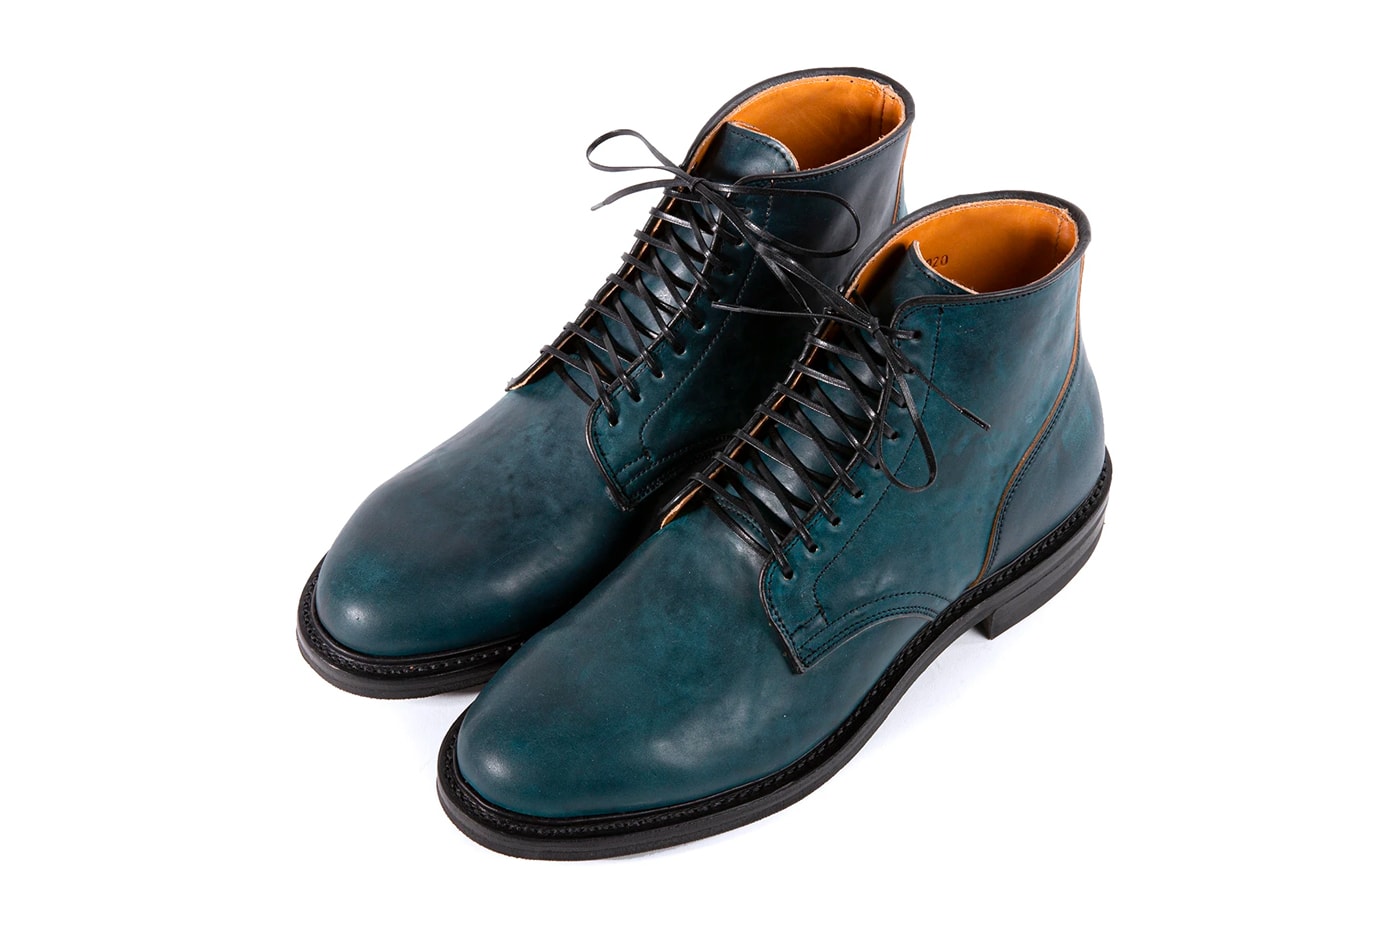 Viberg Intense Blue Tumbled Shell Cordovan Release Boots Service Boots Derby Shoes leather Dainite Goodyear Welt footwear dress shoes handmade craftsmanship 